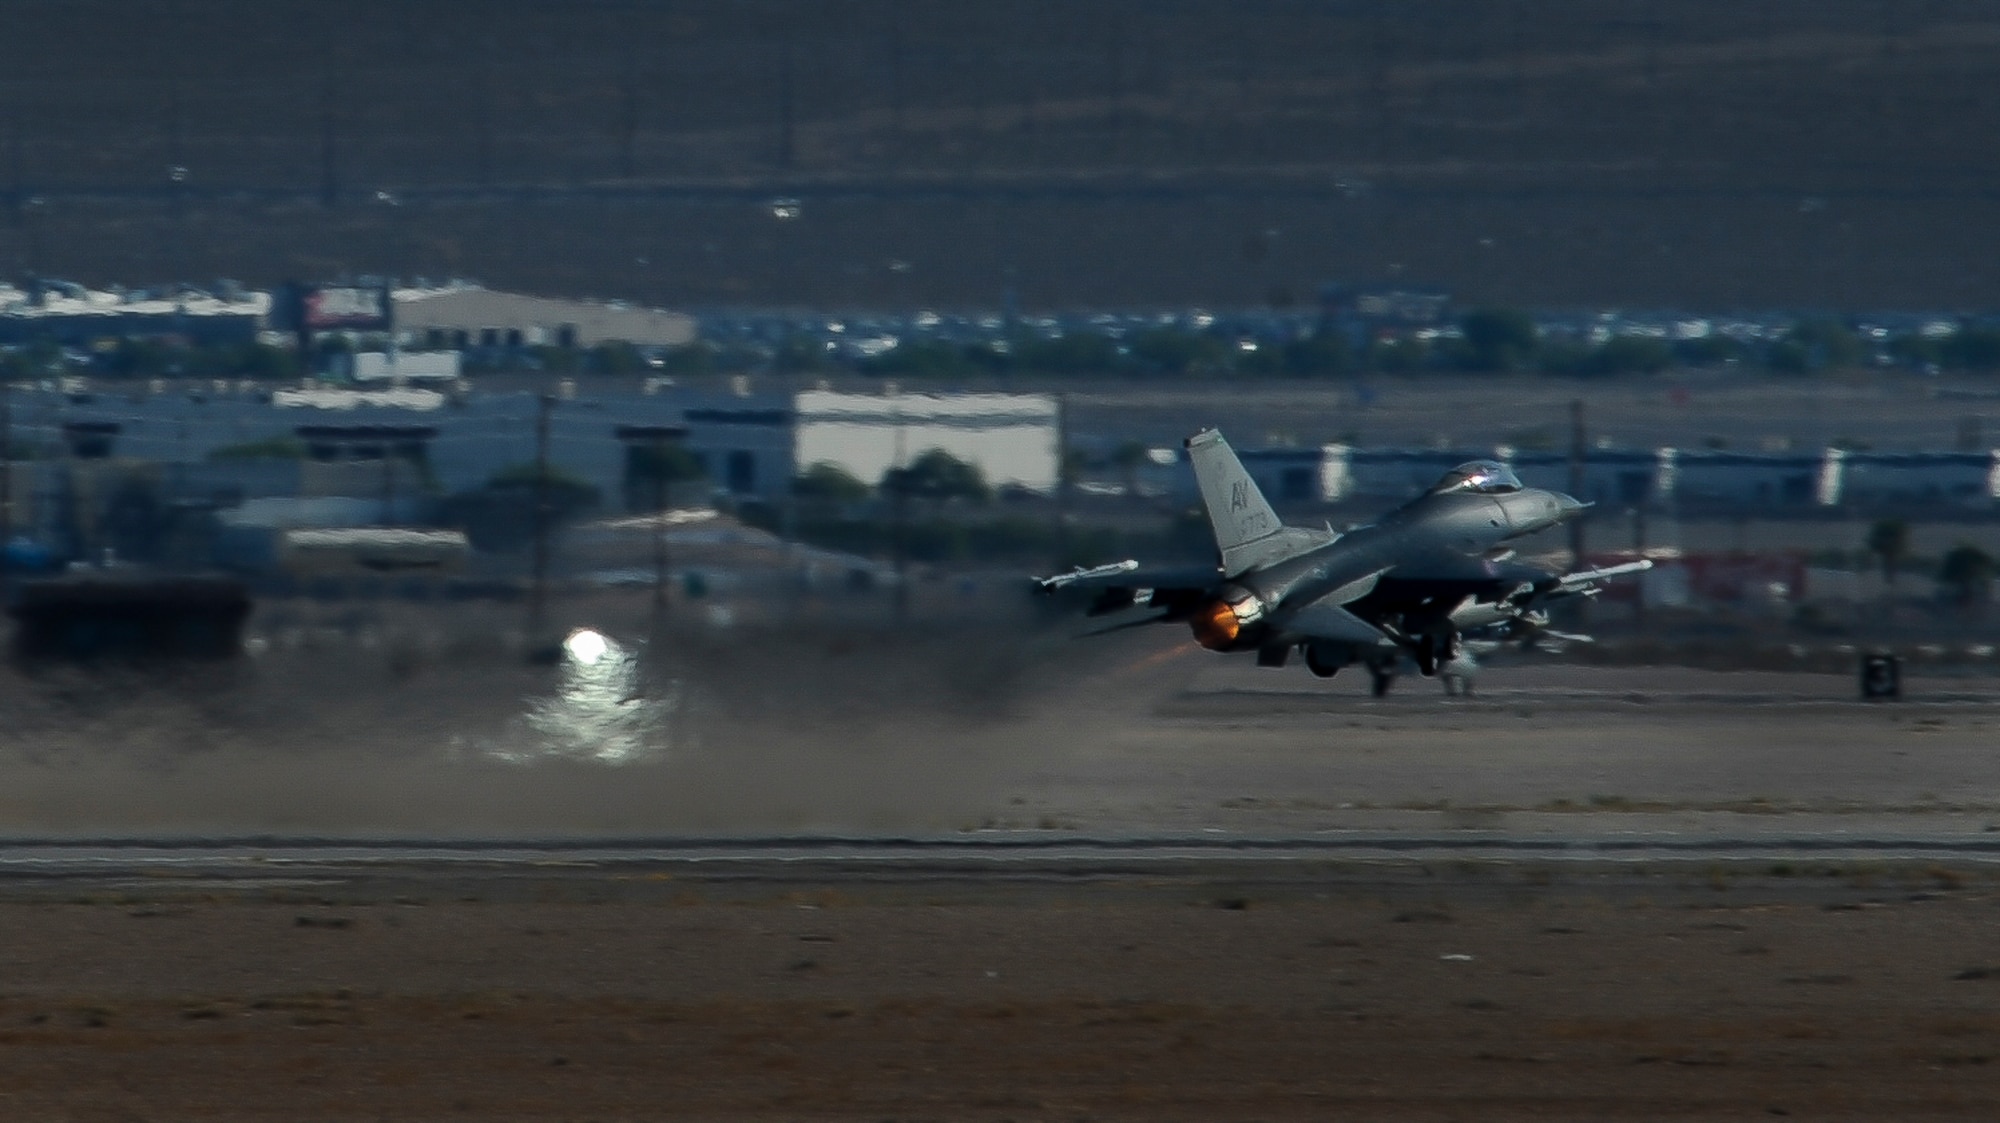 An F-16, assigned to the 555th Fighter Squadron, Aviano Air Force Base, Italy, takes off at Nellis Air Force Base, Nev., Aug. 2, 2016. Green Flag, in support of the US Army's National Training Center, provides invaluable combat training to Joint and Coalition warfighters in the art of air-land integration and the joint employment of airpower. (United States Air Force photo by Airman 1st Class Kevin Tanenbaum/Released)